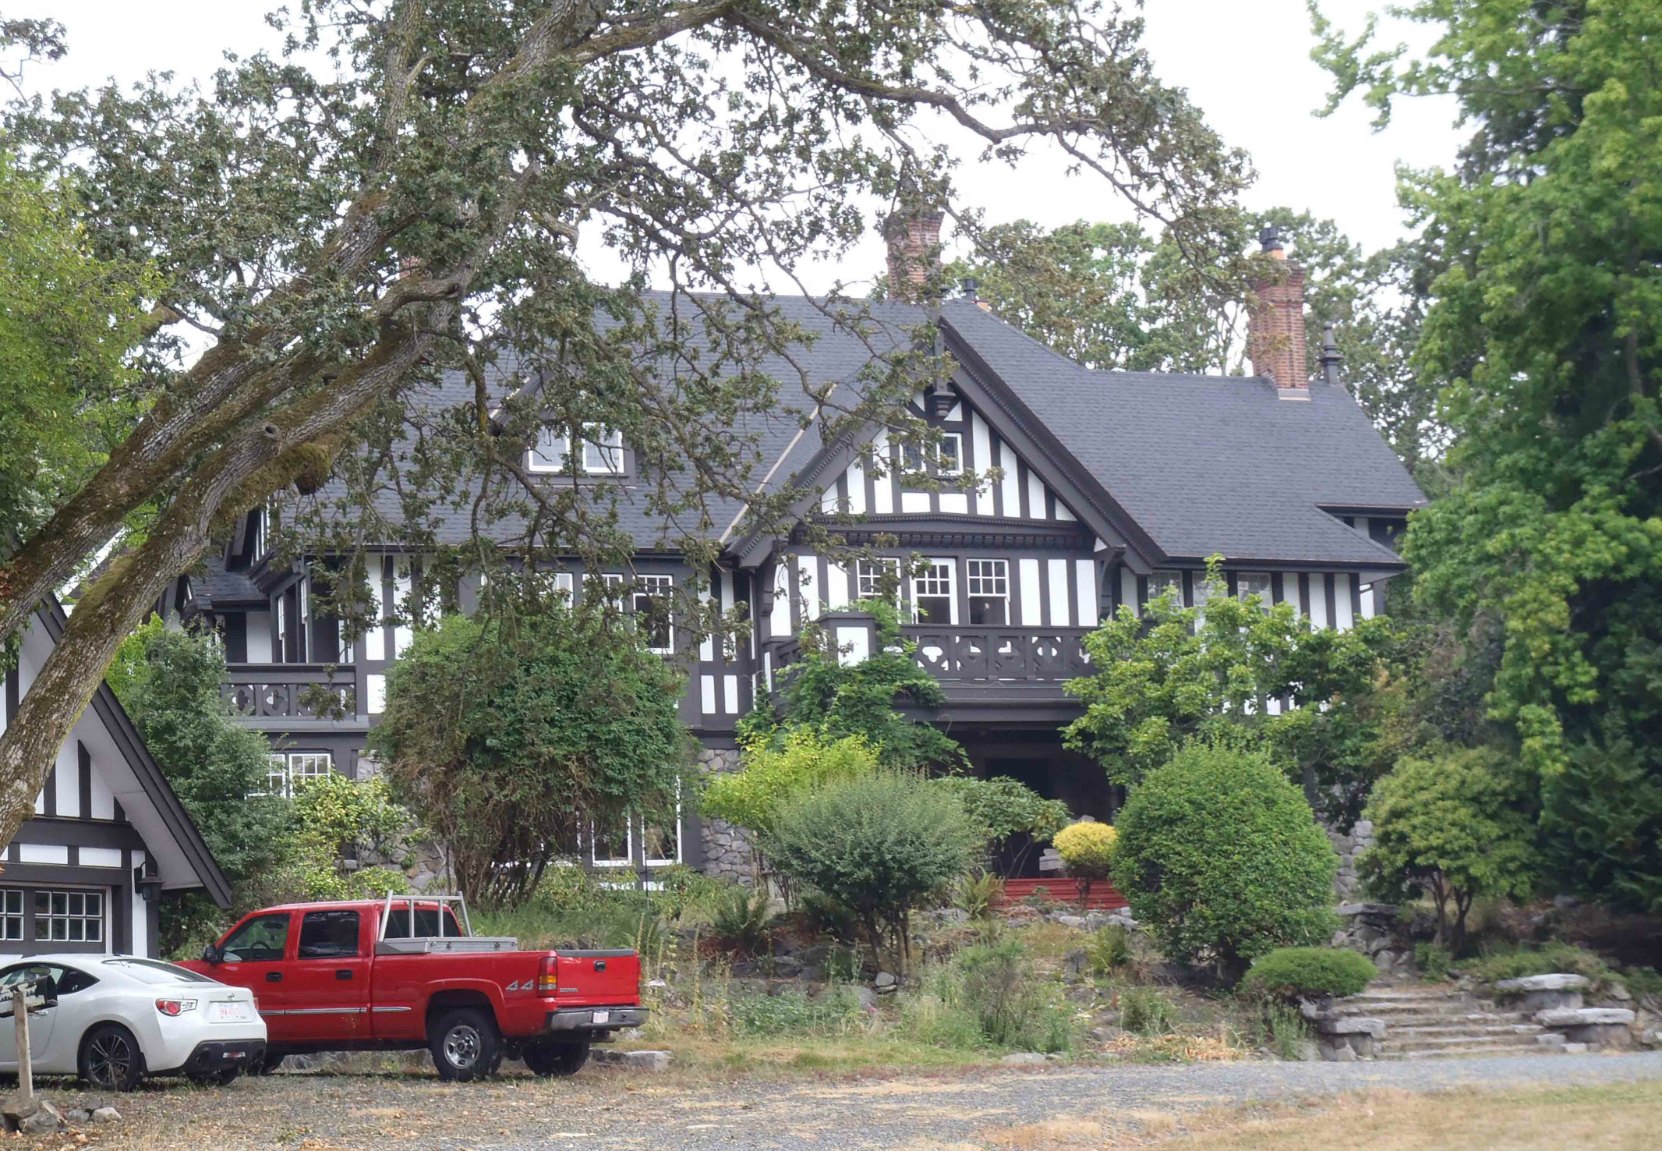 1770 Rockland Avenue, Victoria, B.C. was designed and built in 1905 by architect Samuel Maclure for Biggerstaff Wilson, a member of Victoria-Columbia Lodge No.1